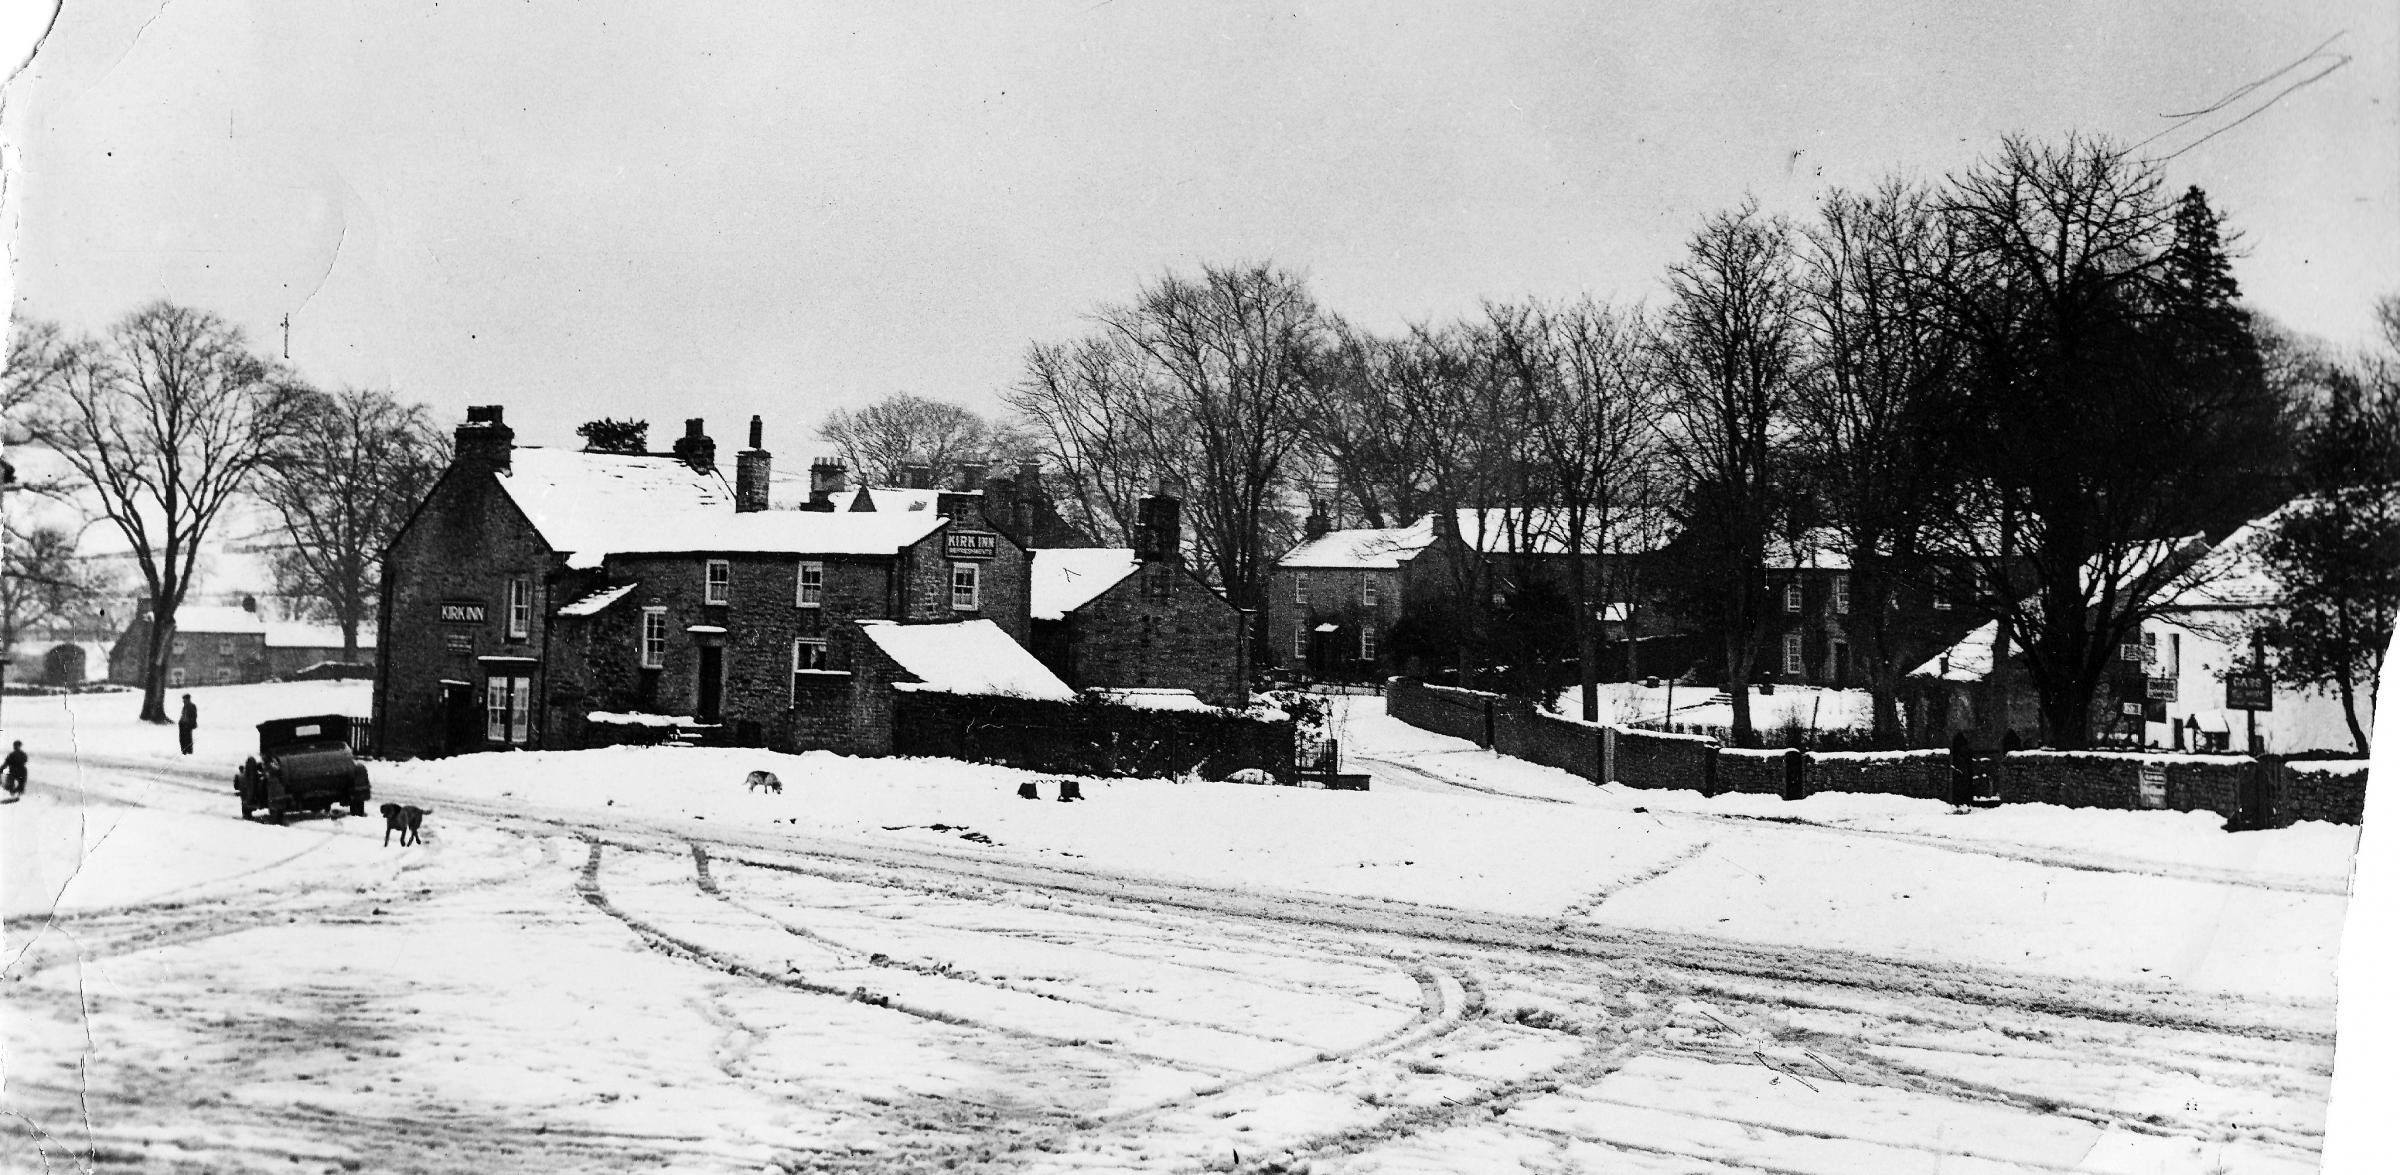 A fabulous, if undated, photo from the D&S archive taken from Romaldkirk church looking across the Kirk Inn towards the Reverend Clevelands rectory, which is hidden behind the pub. The picture was probably taken in the early 1930s. If our old car